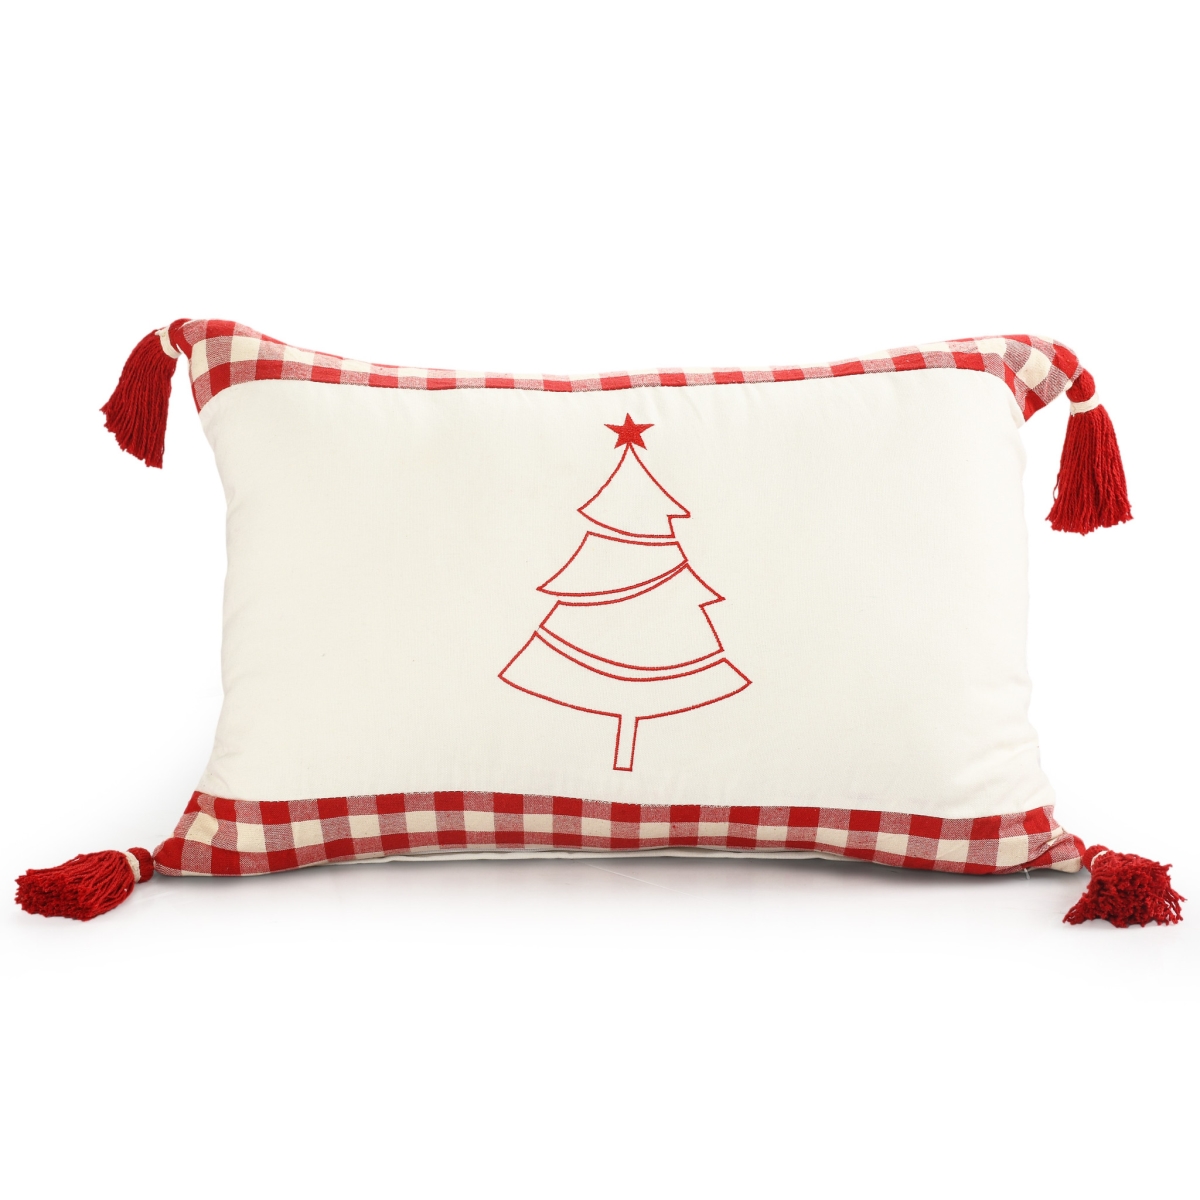 Picture of HomeRoots 534294 16 x 24 in. Red & White Christmas Tree Cotton Zippered Pillow with Tassels